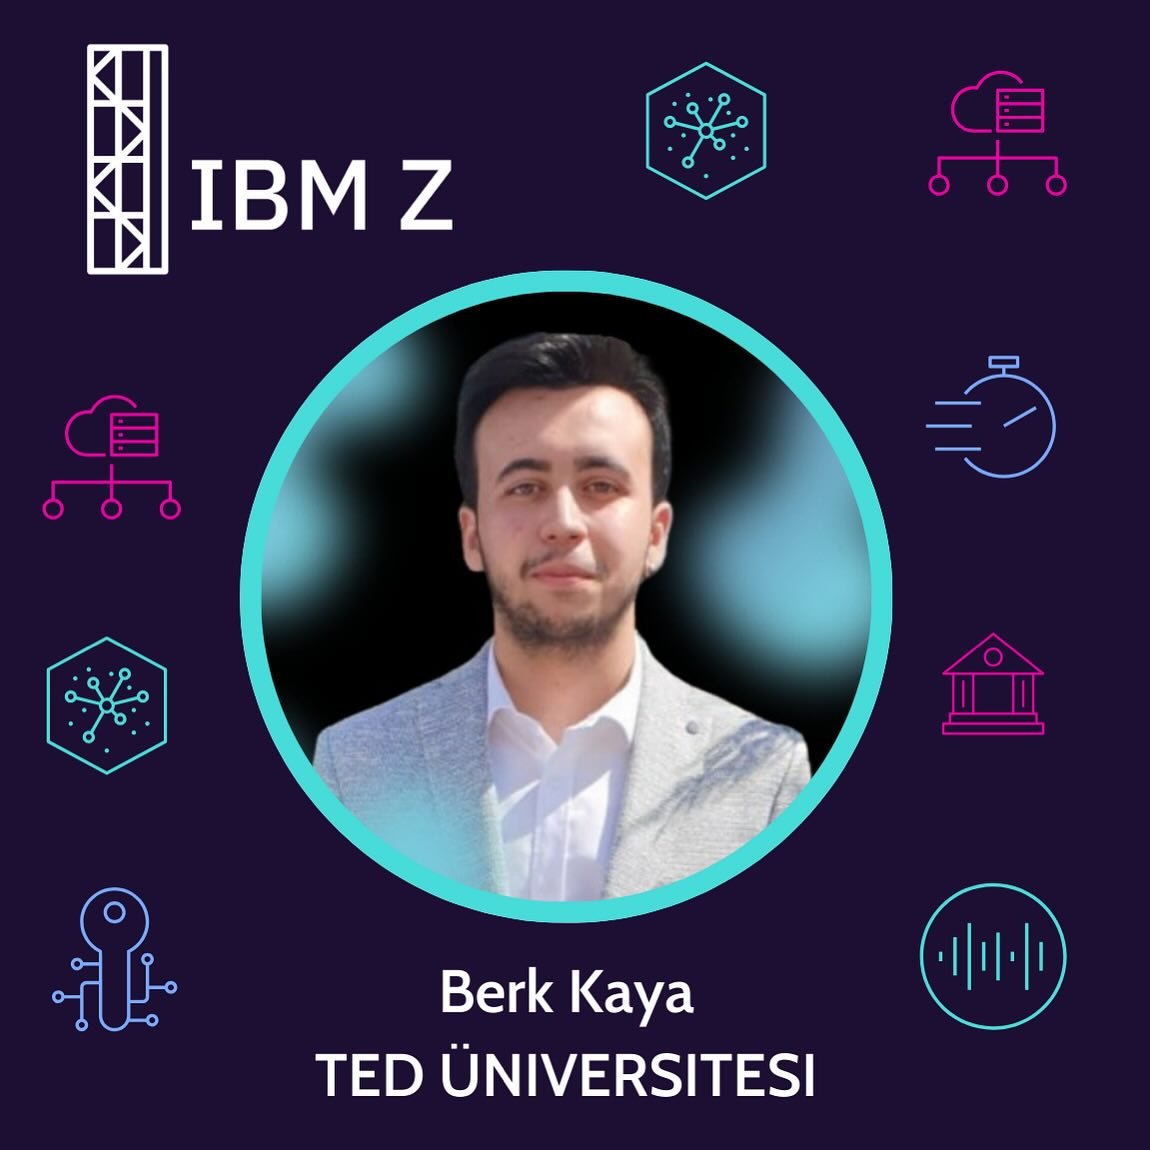 🚀 Meet Berk Kaya from Turkey, a force to be reckoned with at TED &Uuml;niversitesi! 🇹🇷 Thrilled to showcase his groundbreaking contributions as an IBM Z Student Ambassador. Thank you for all your hard work! 🌟 
.
.
.
.
#IBMZ #YourBigYear #IBMZStud